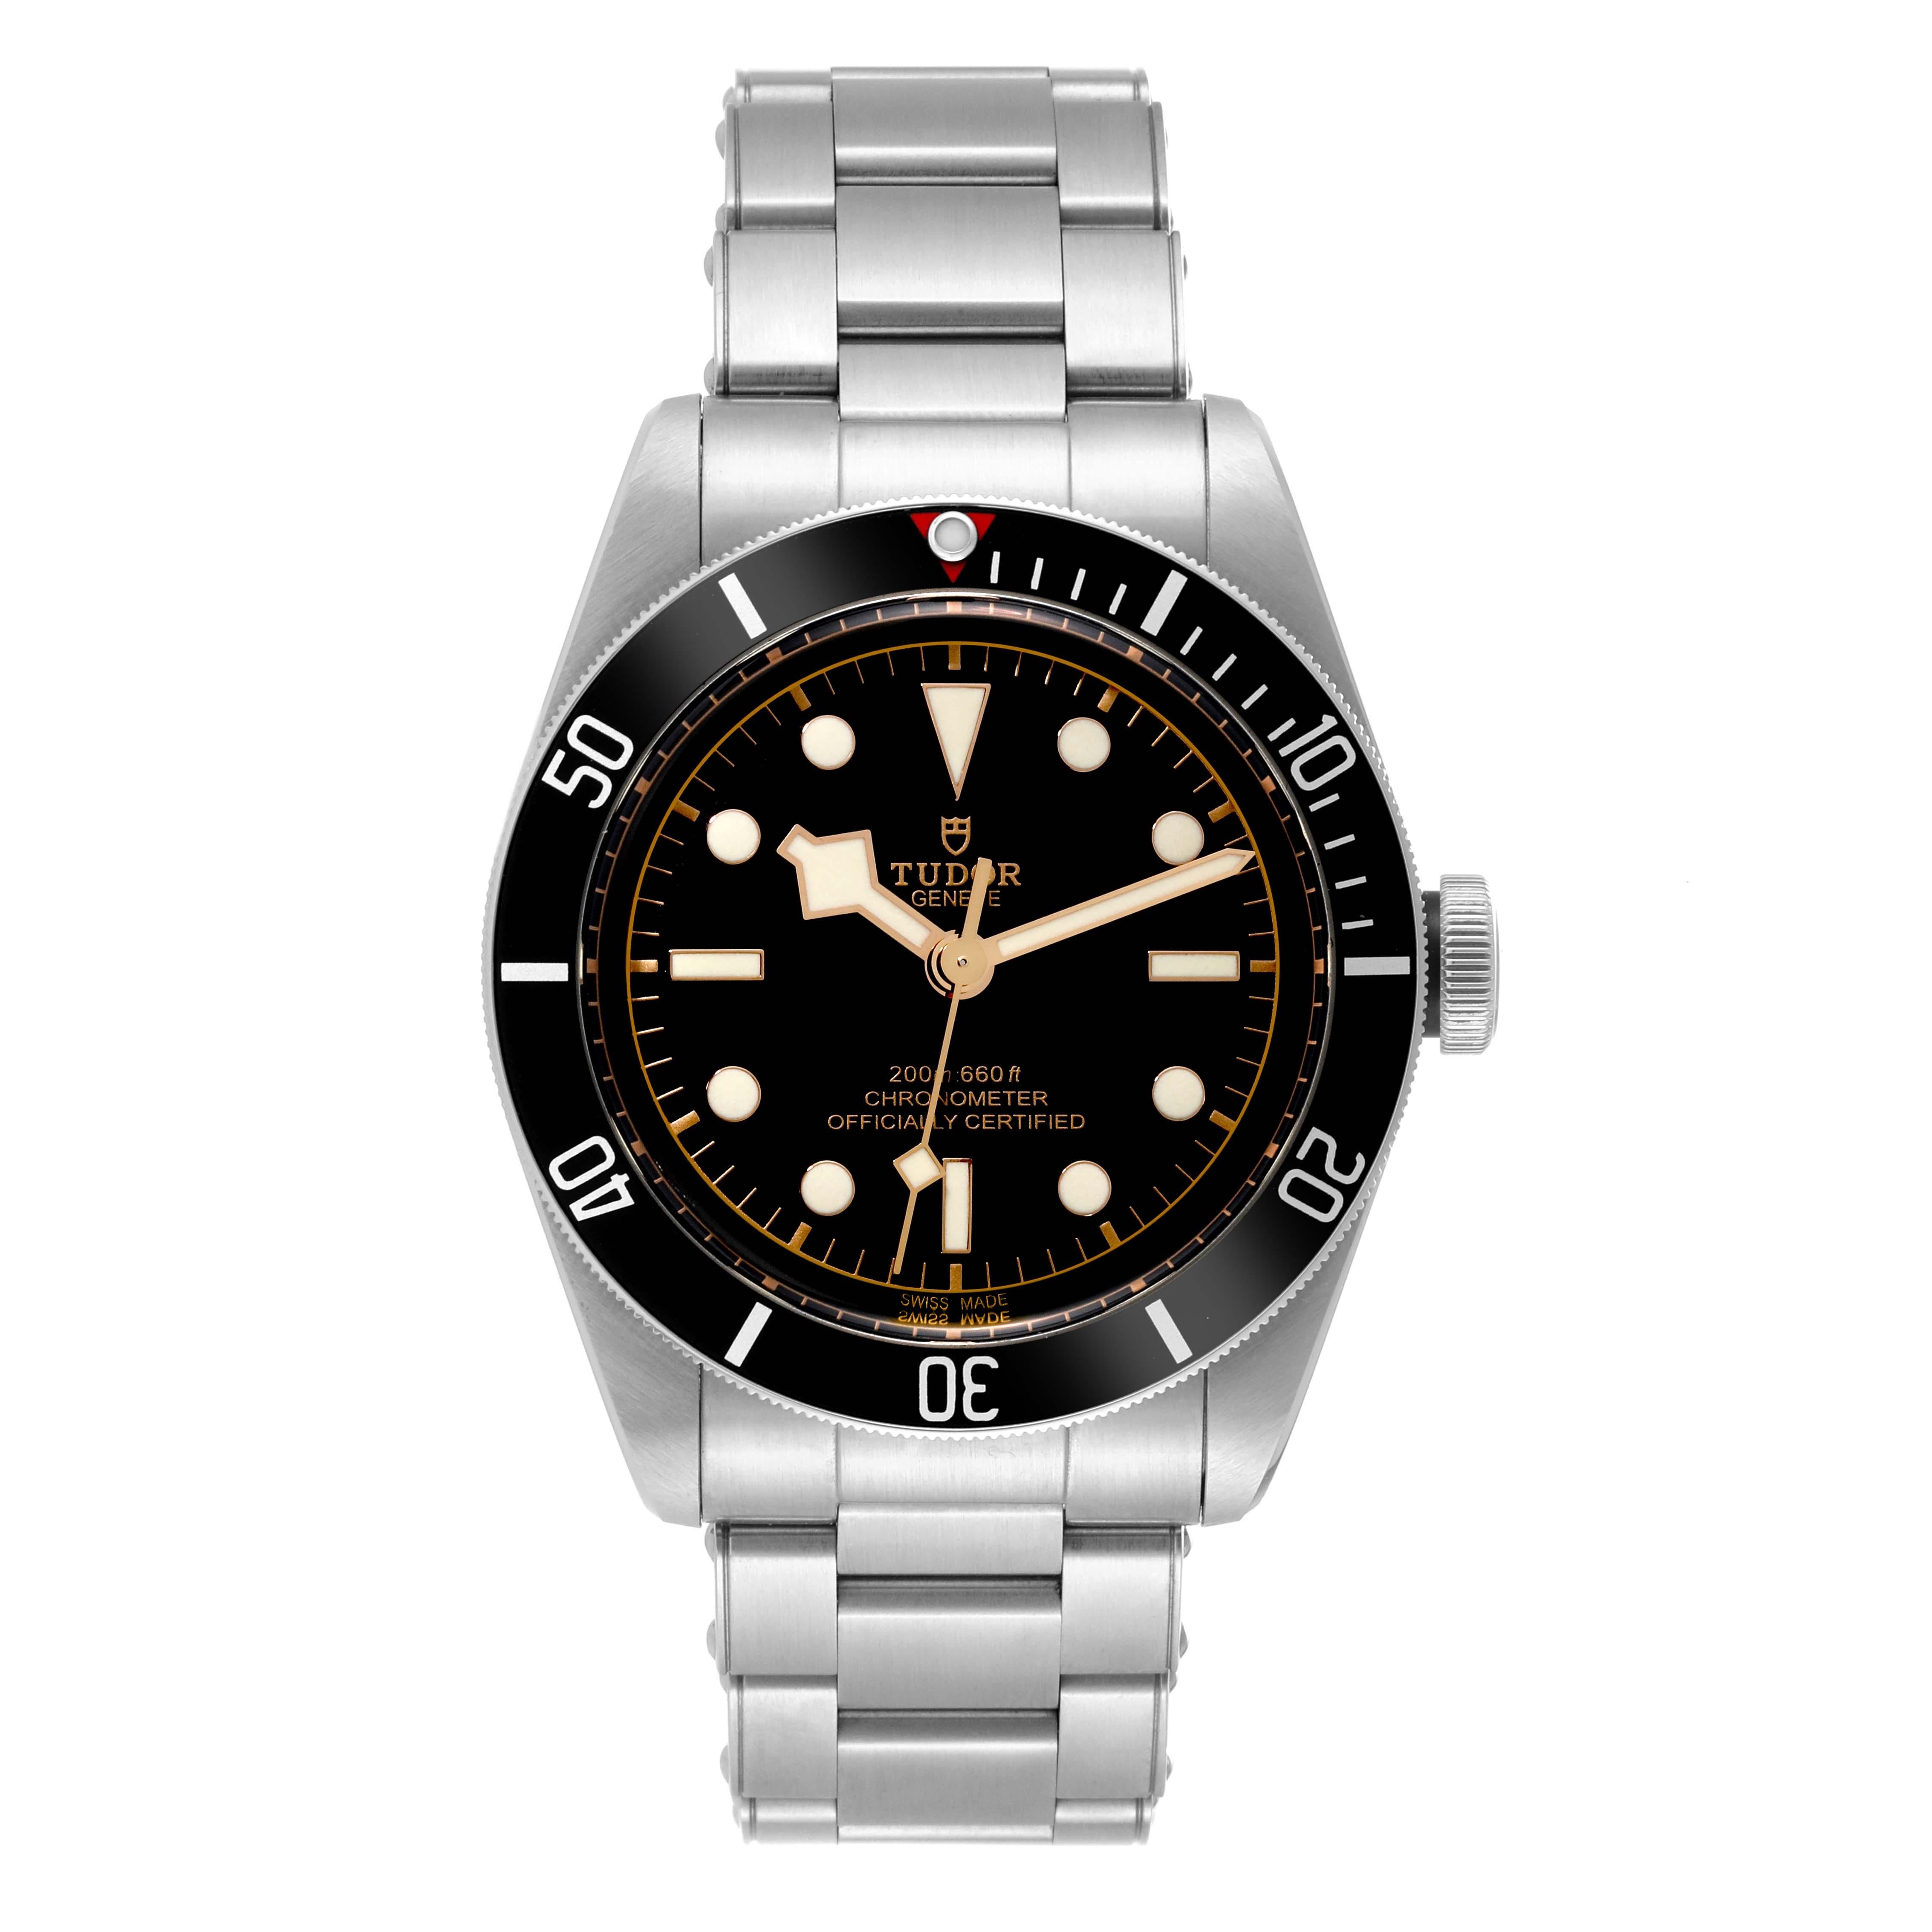 Tudor Heritage Black Bay Steel Mens Watch 79230 Unworn. Automatic self-winding movement. Stainless steel oyster case 41.0 mm in diameter. Tudor logo on the crown. Uni-directional rotating stainless steel bezel with black insert. Scratch resistant